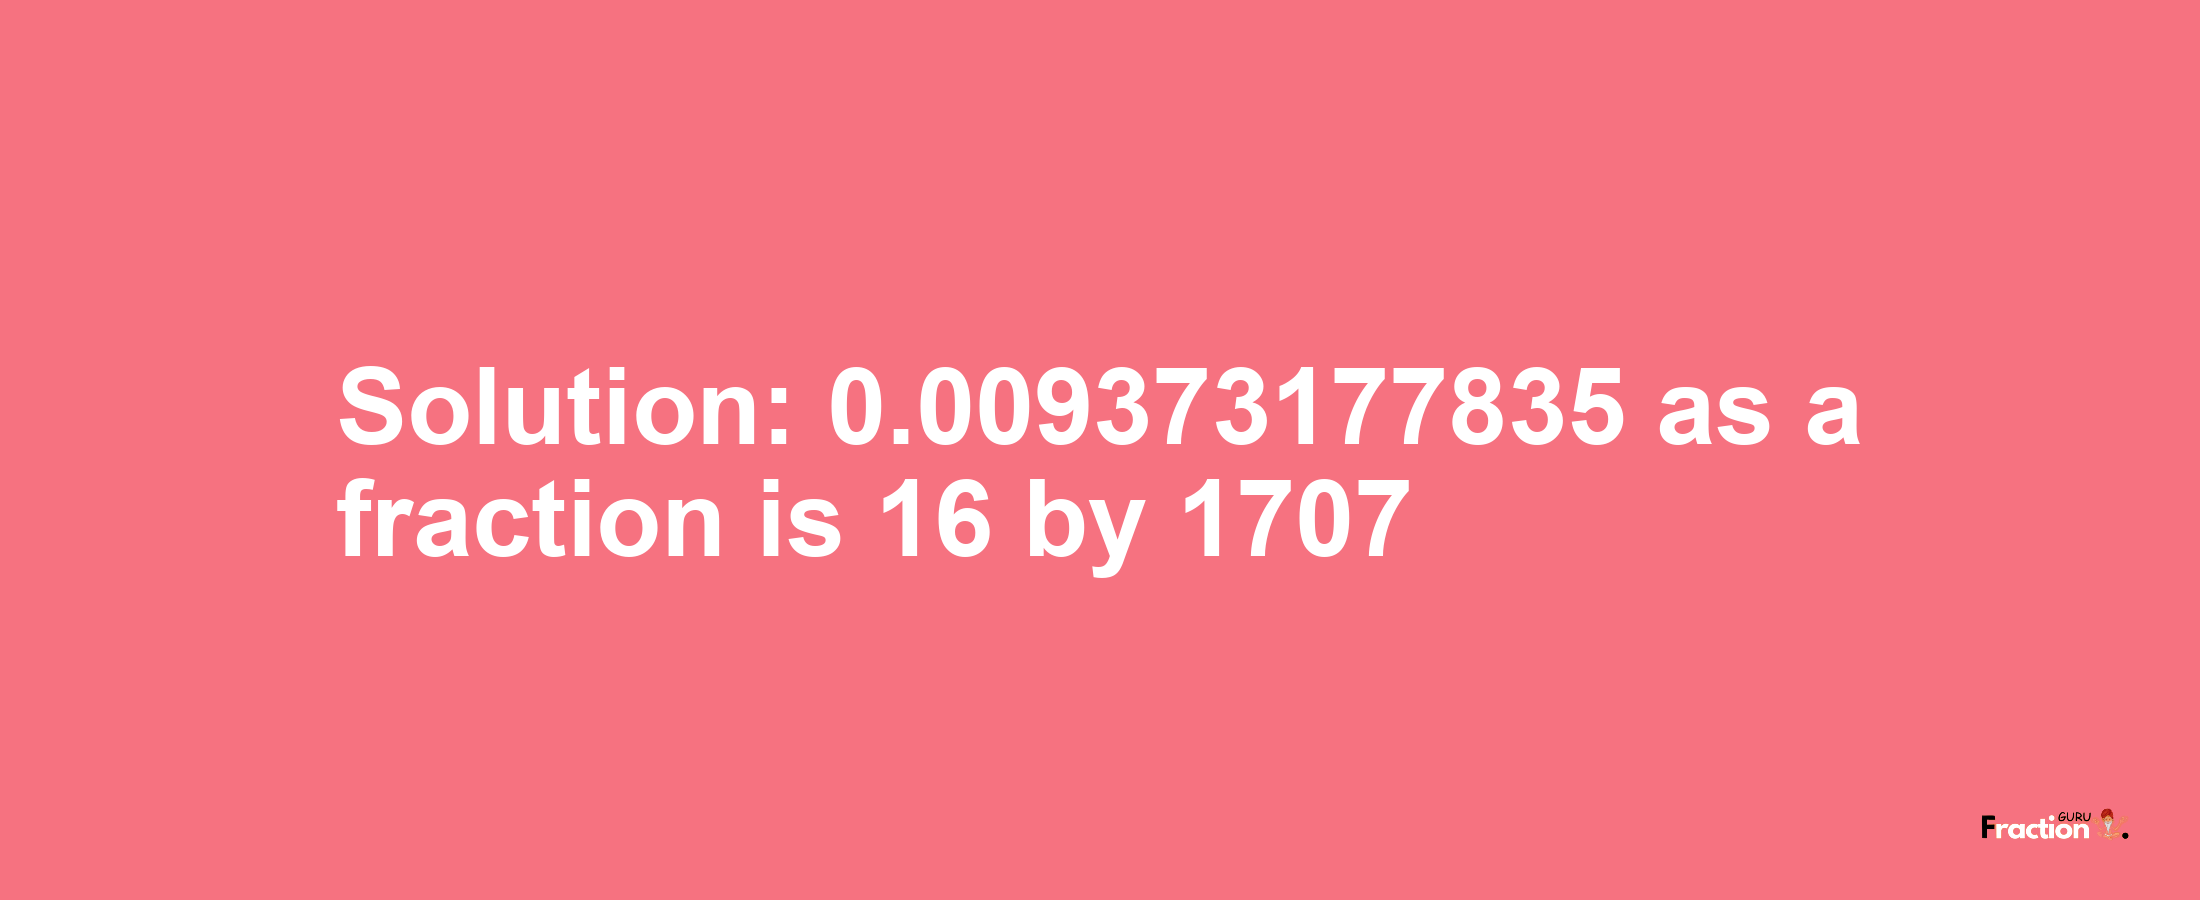 Solution:0.009373177835 as a fraction is 16/1707